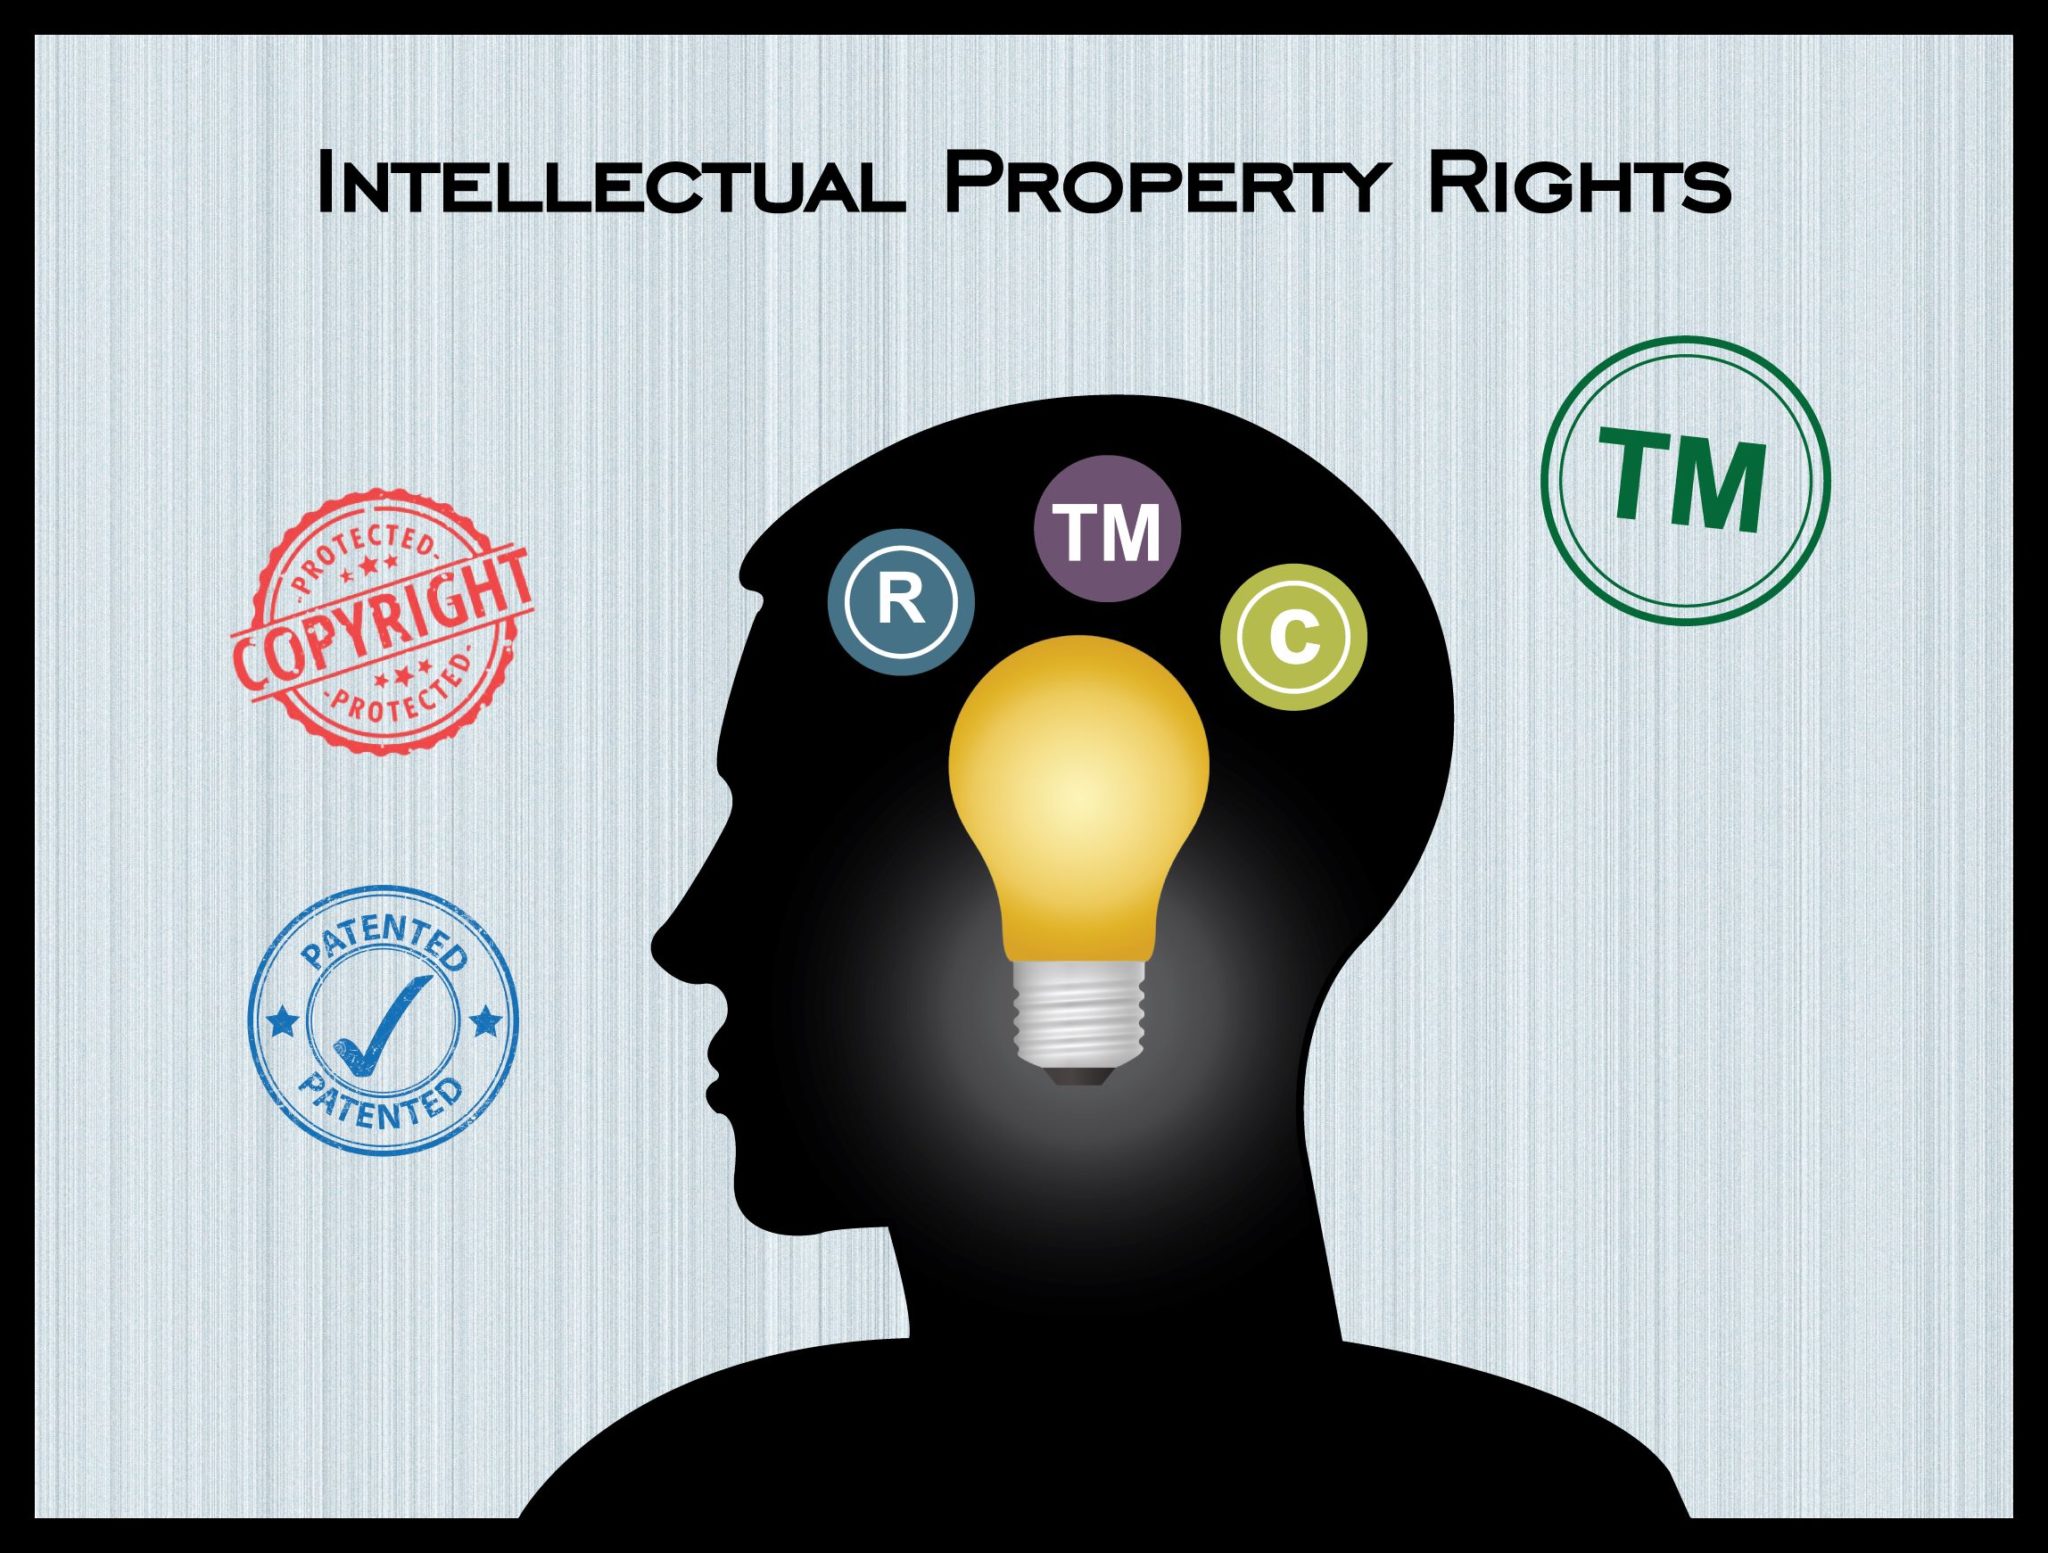 Intellectual Property Rights Powerhouse For Encouraging Innovation And